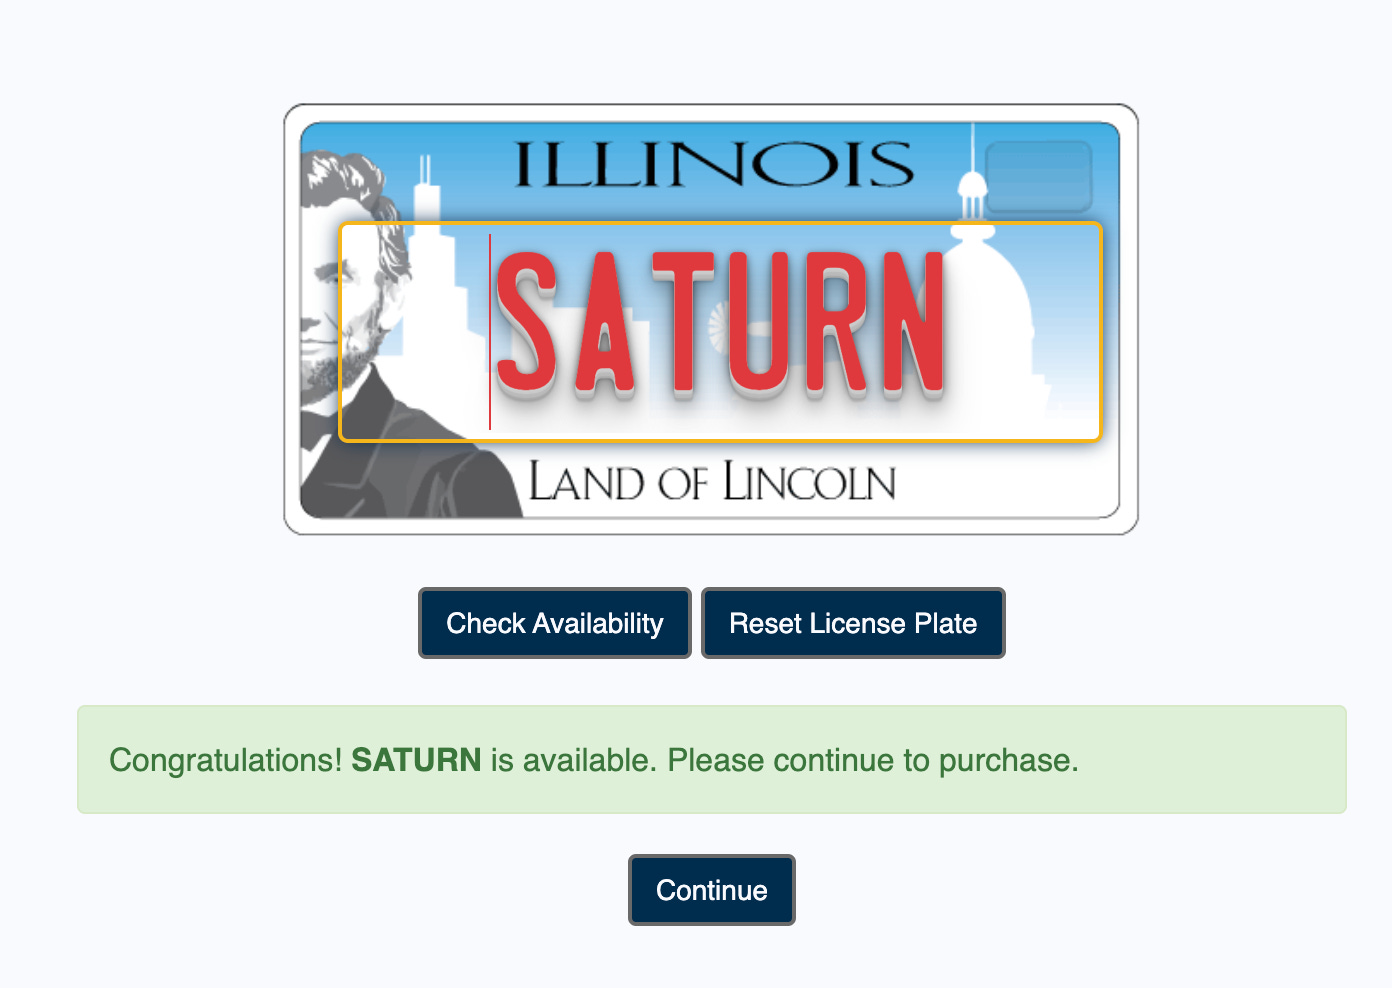 The IL vanity plate site saying I could purchase SATURN as an option if I wanted